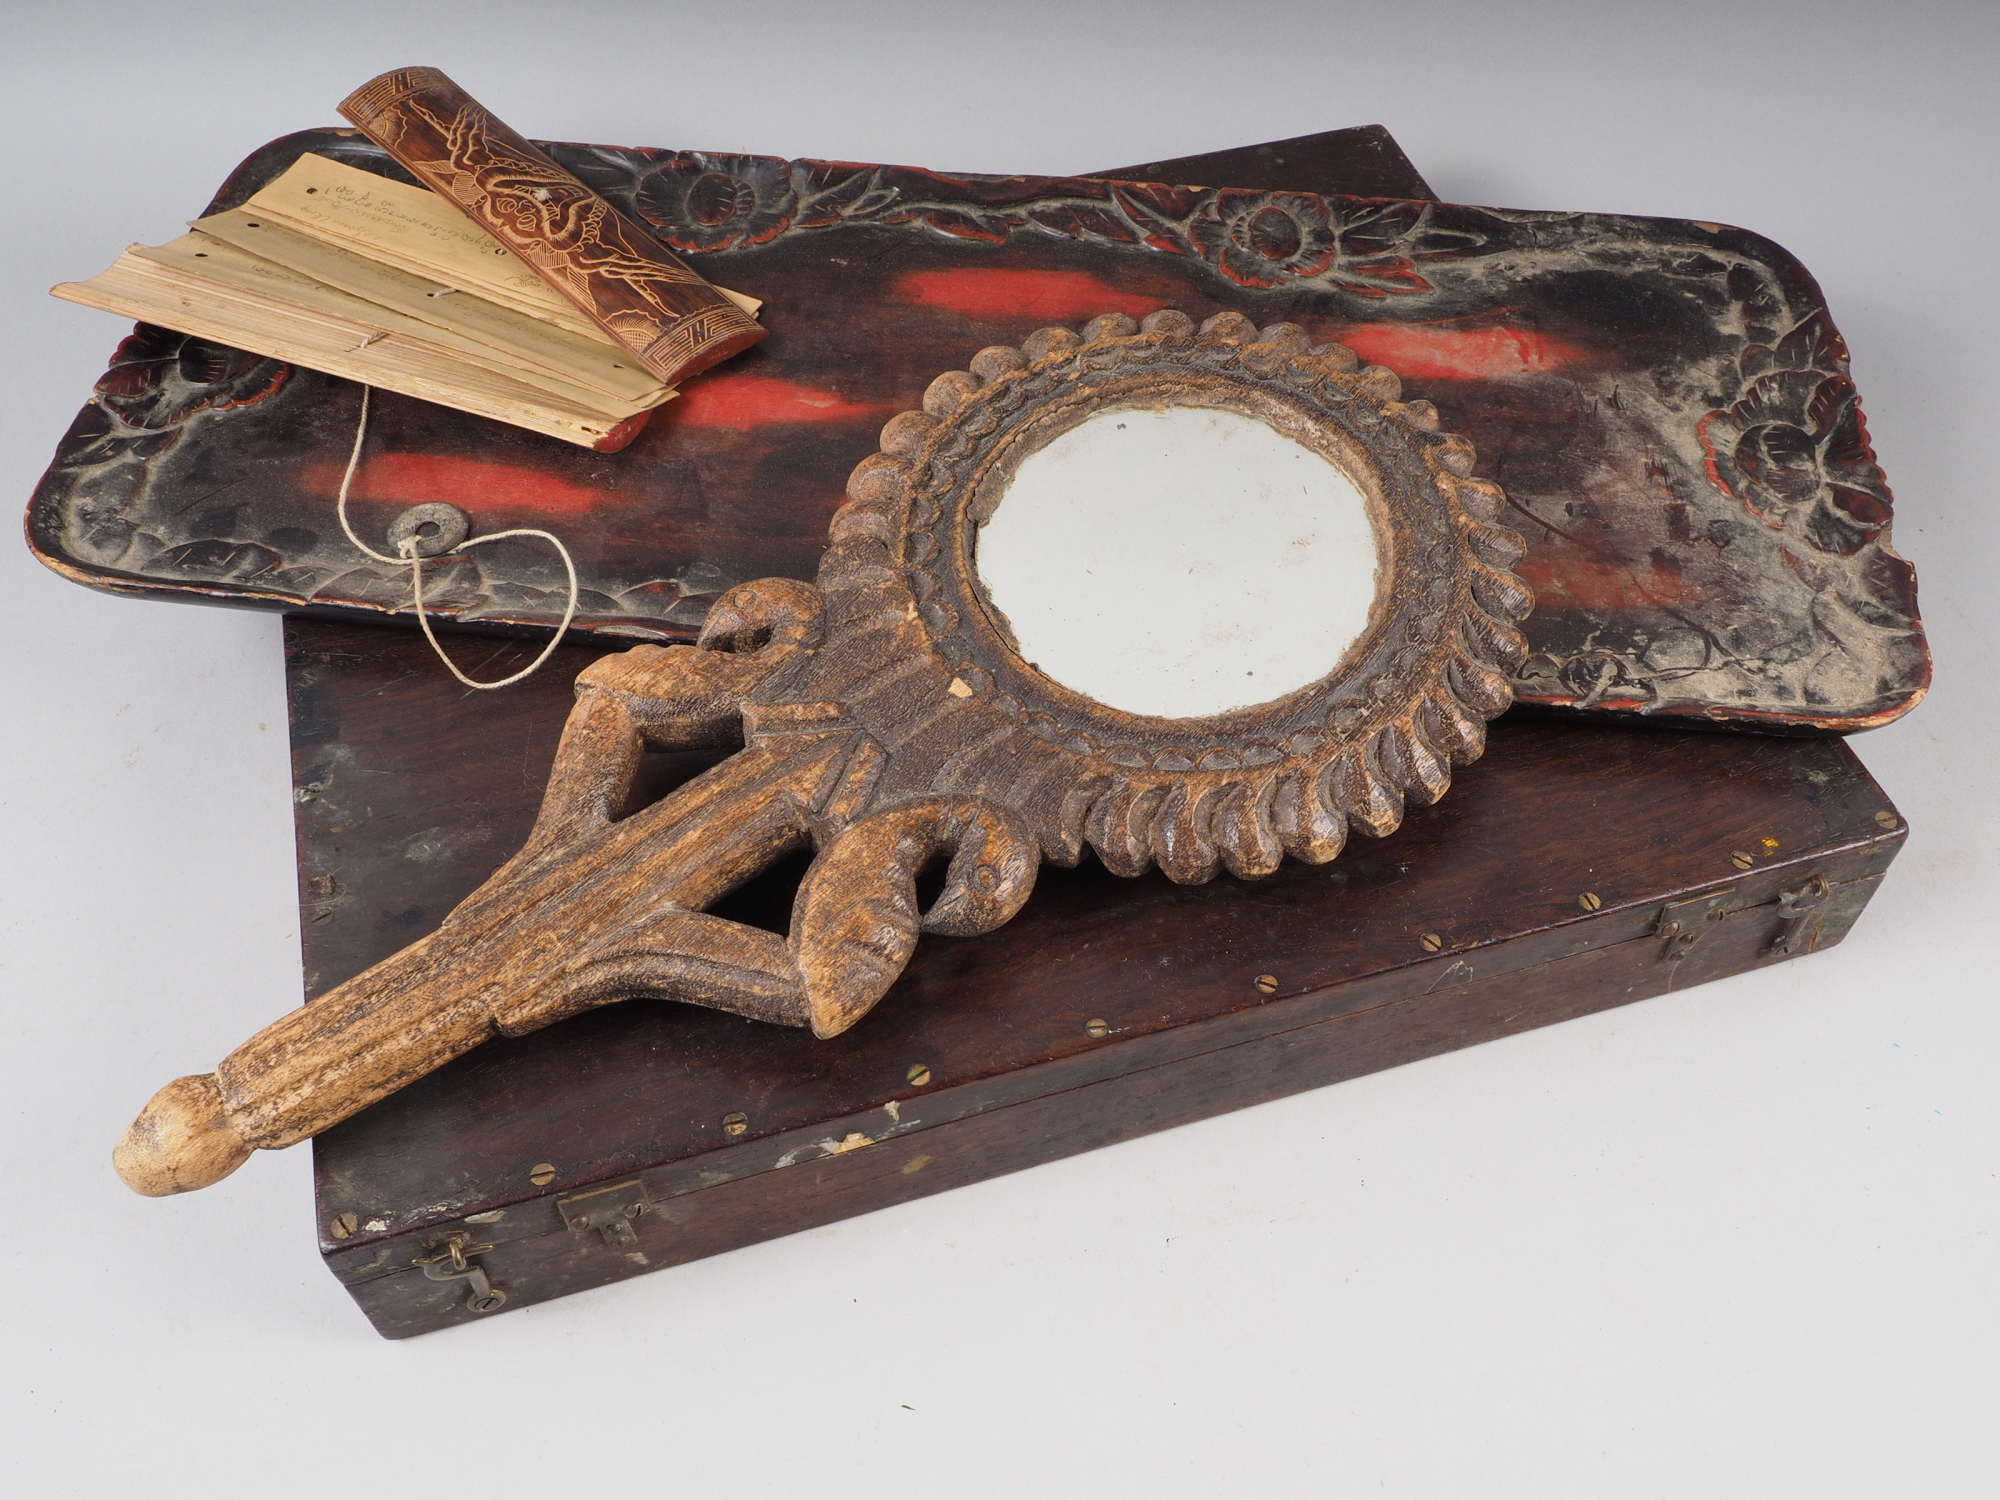 An artist's mahogany travelling paint box, a lacquered carved wooden tray and a hand mirror, in